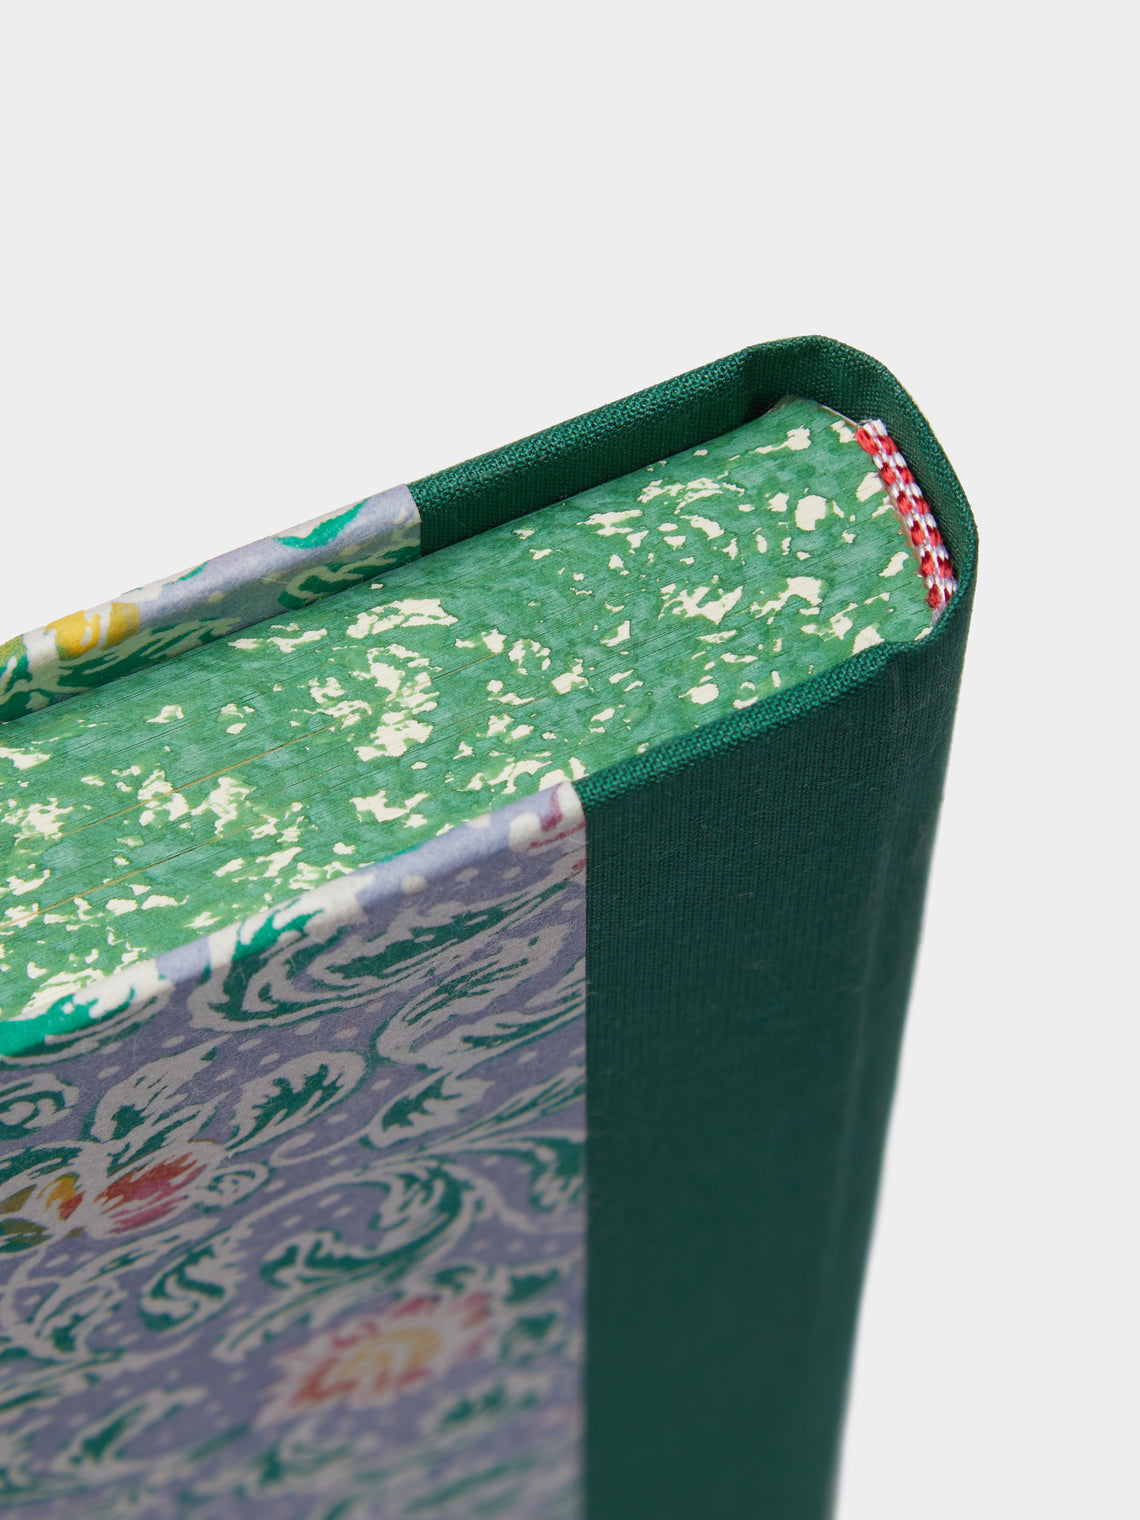 Choosing Keeping - Extra Thick Composition Ledger Notebook - Green - ABASK